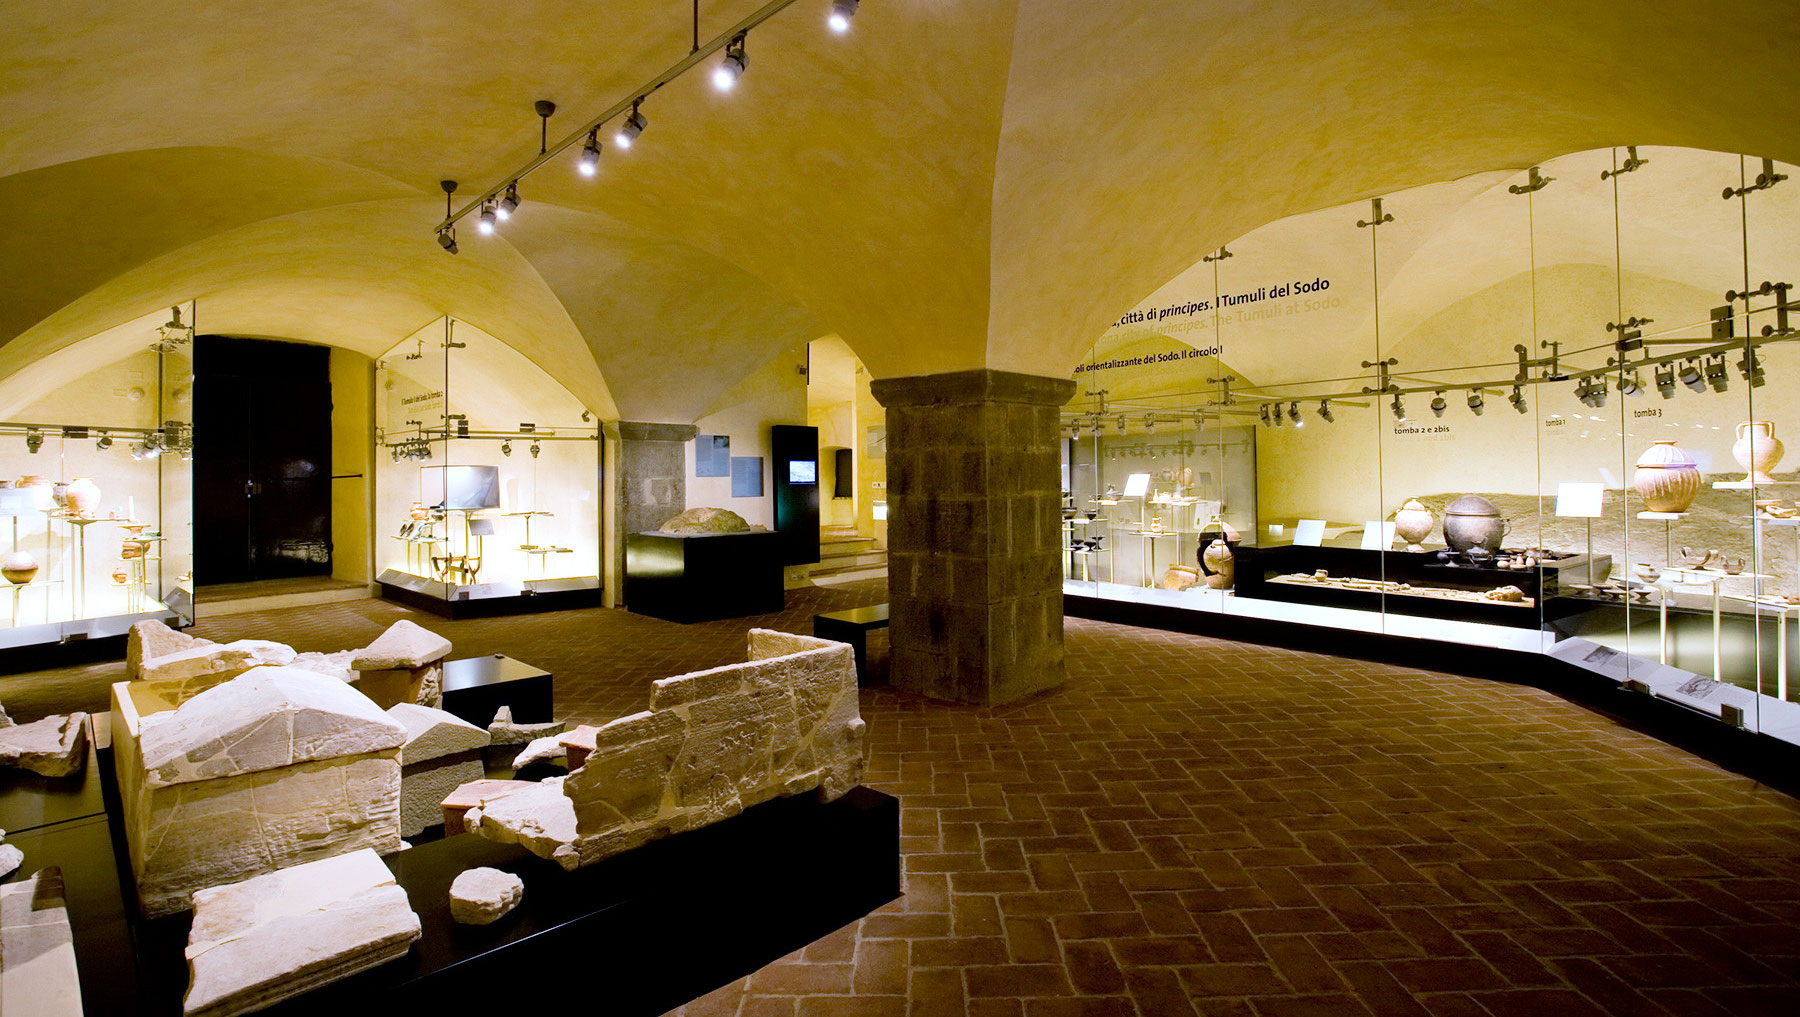 Museum of the Etruscan Academy and of the City of Cortona